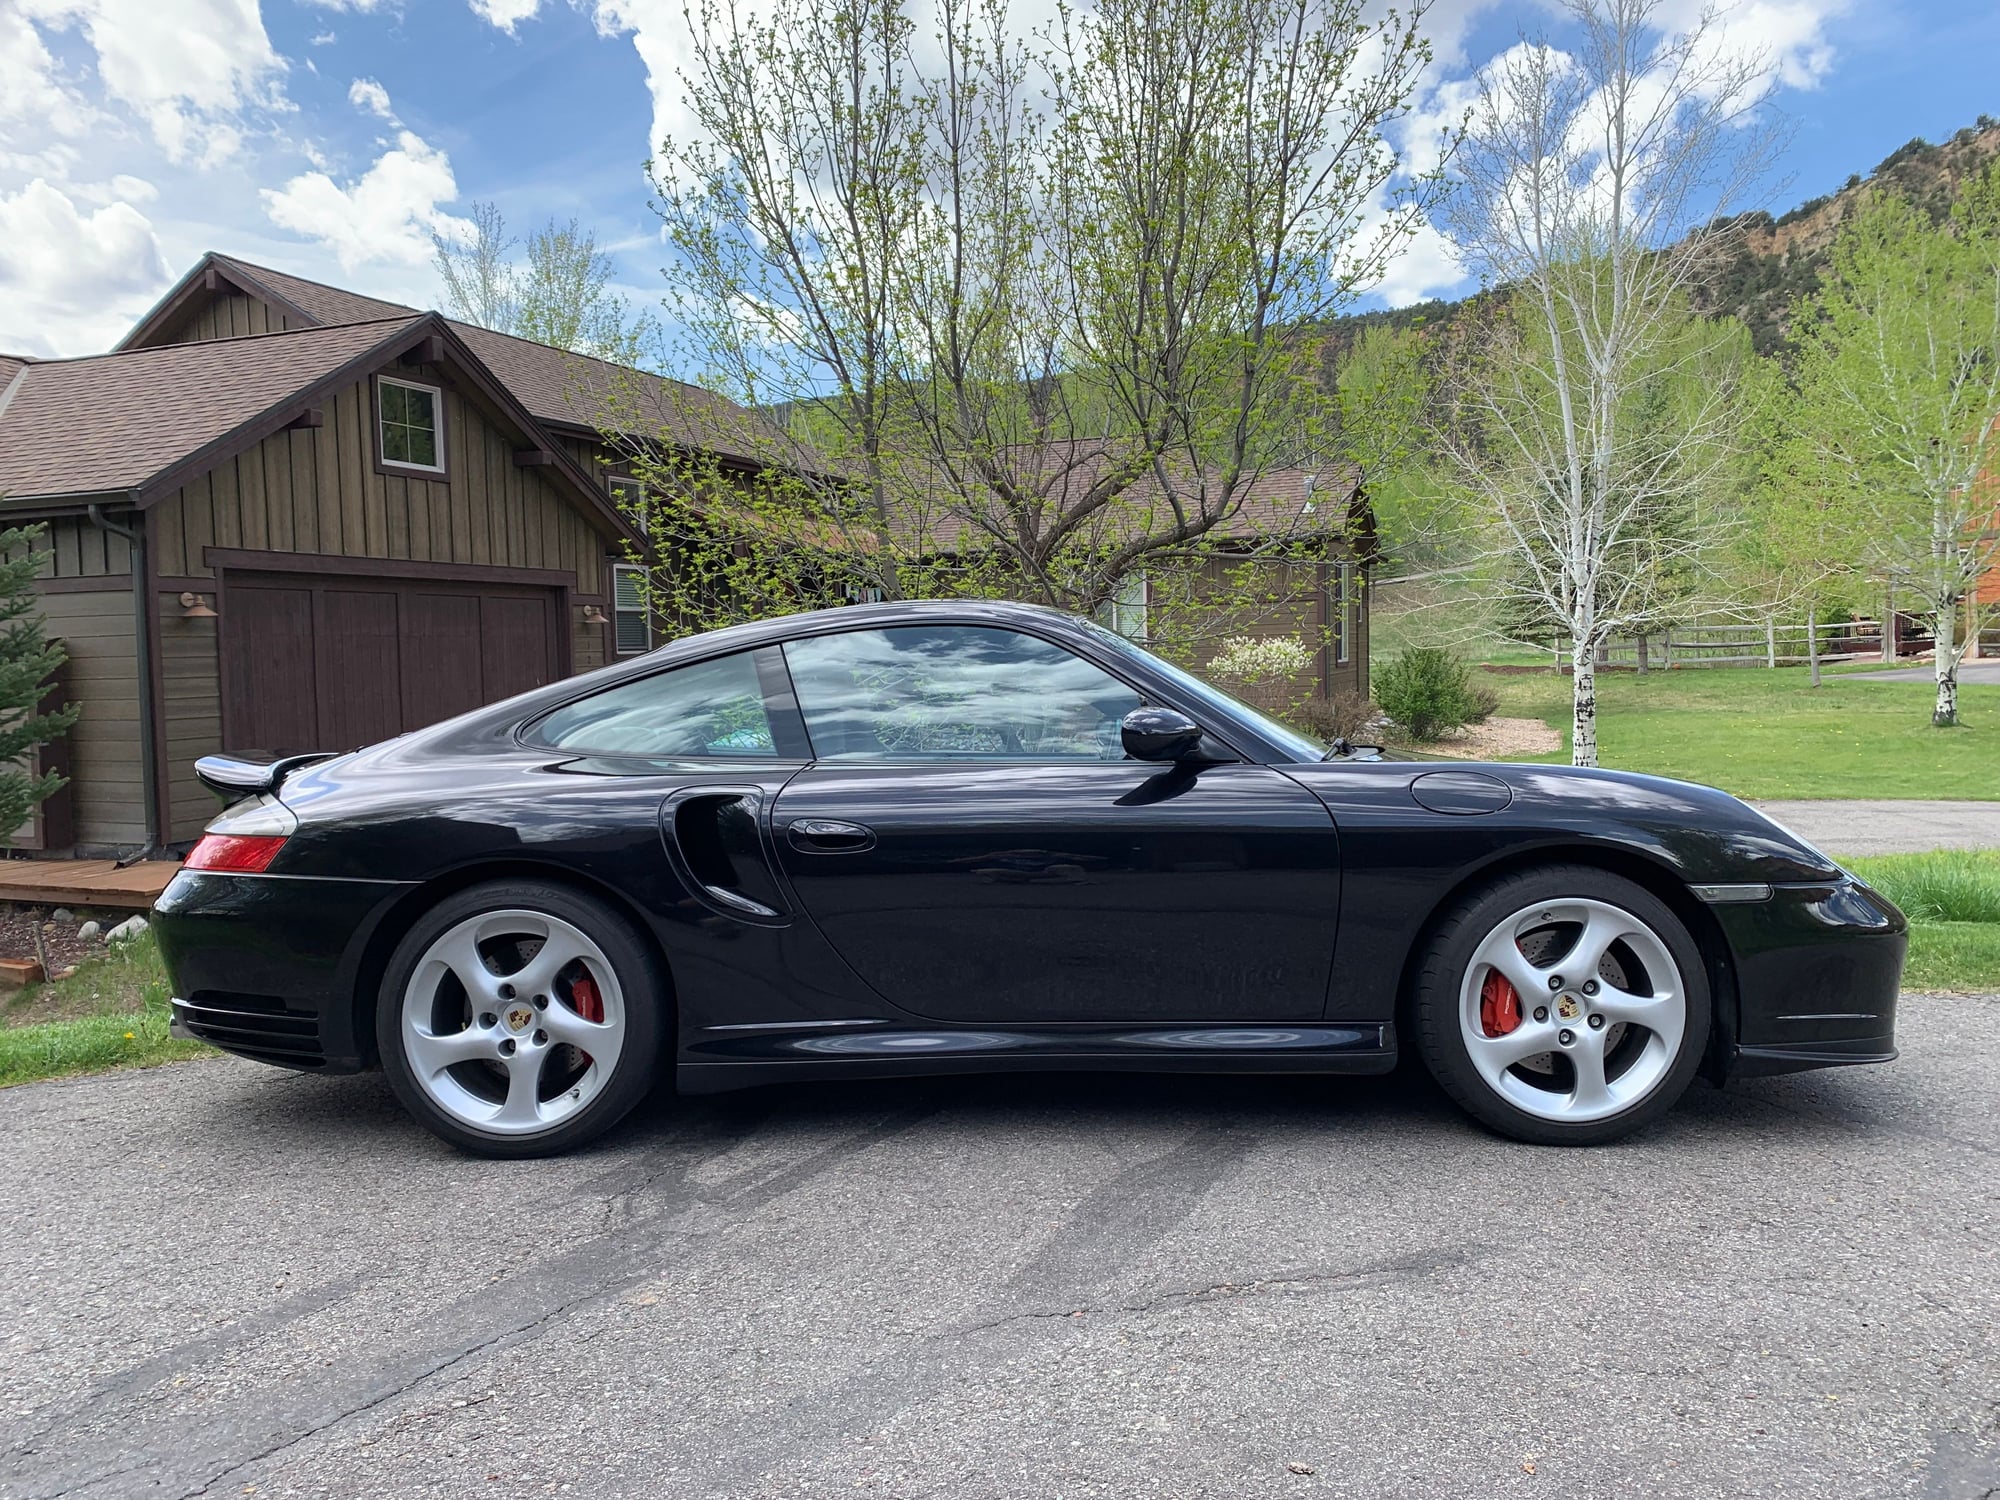 2002 Porsche 911 - 2002 911 Turbo For Sale - Used - VIN WP0AB29952S685468 - 63,400 Miles - 6 cyl - AWD - Manual - Coupe - Black - Glenwood Springs, CO 81601, United States